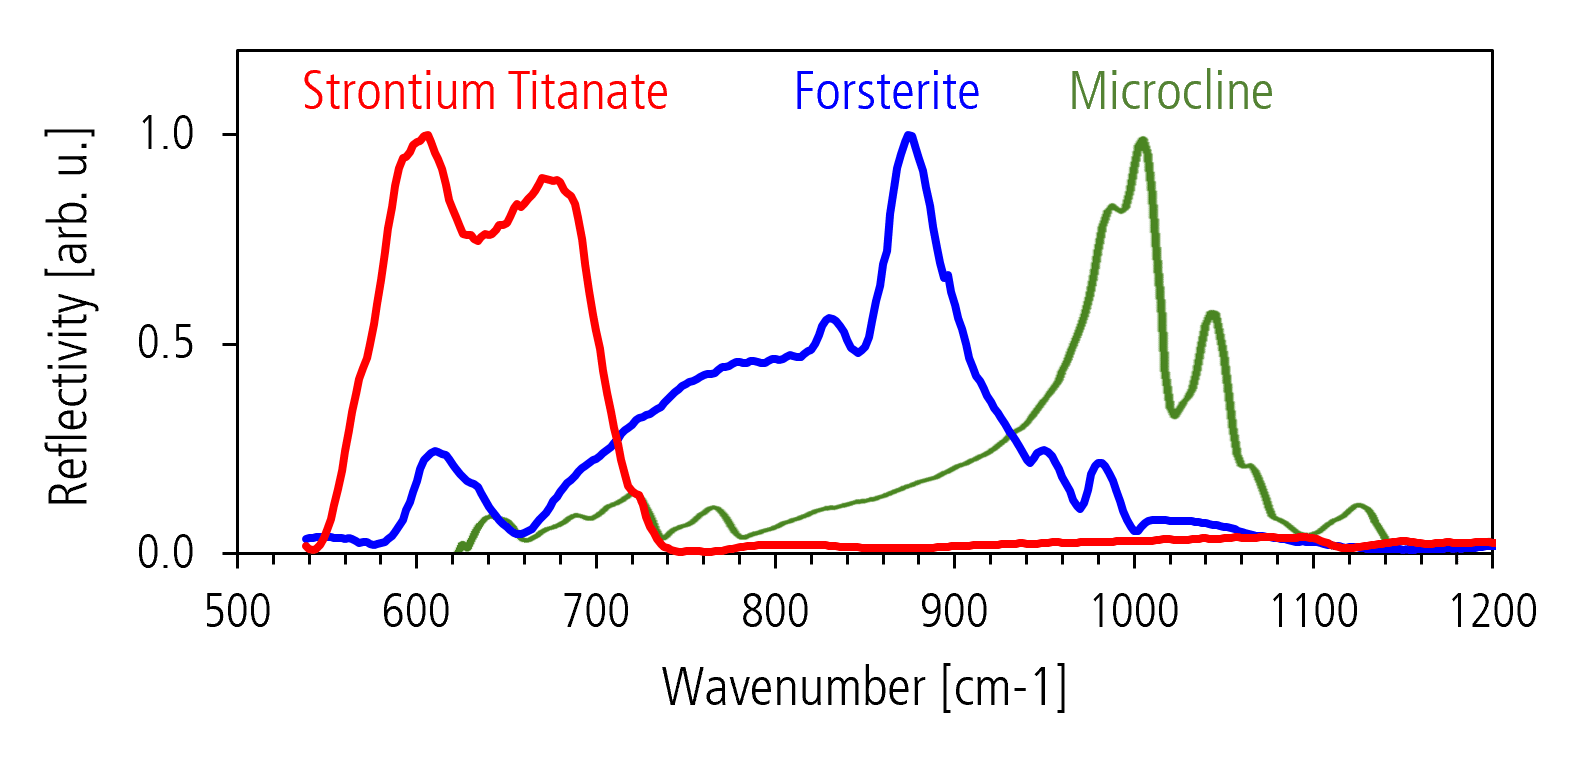 Point spectra of Forsterite, Titanate and Microcline